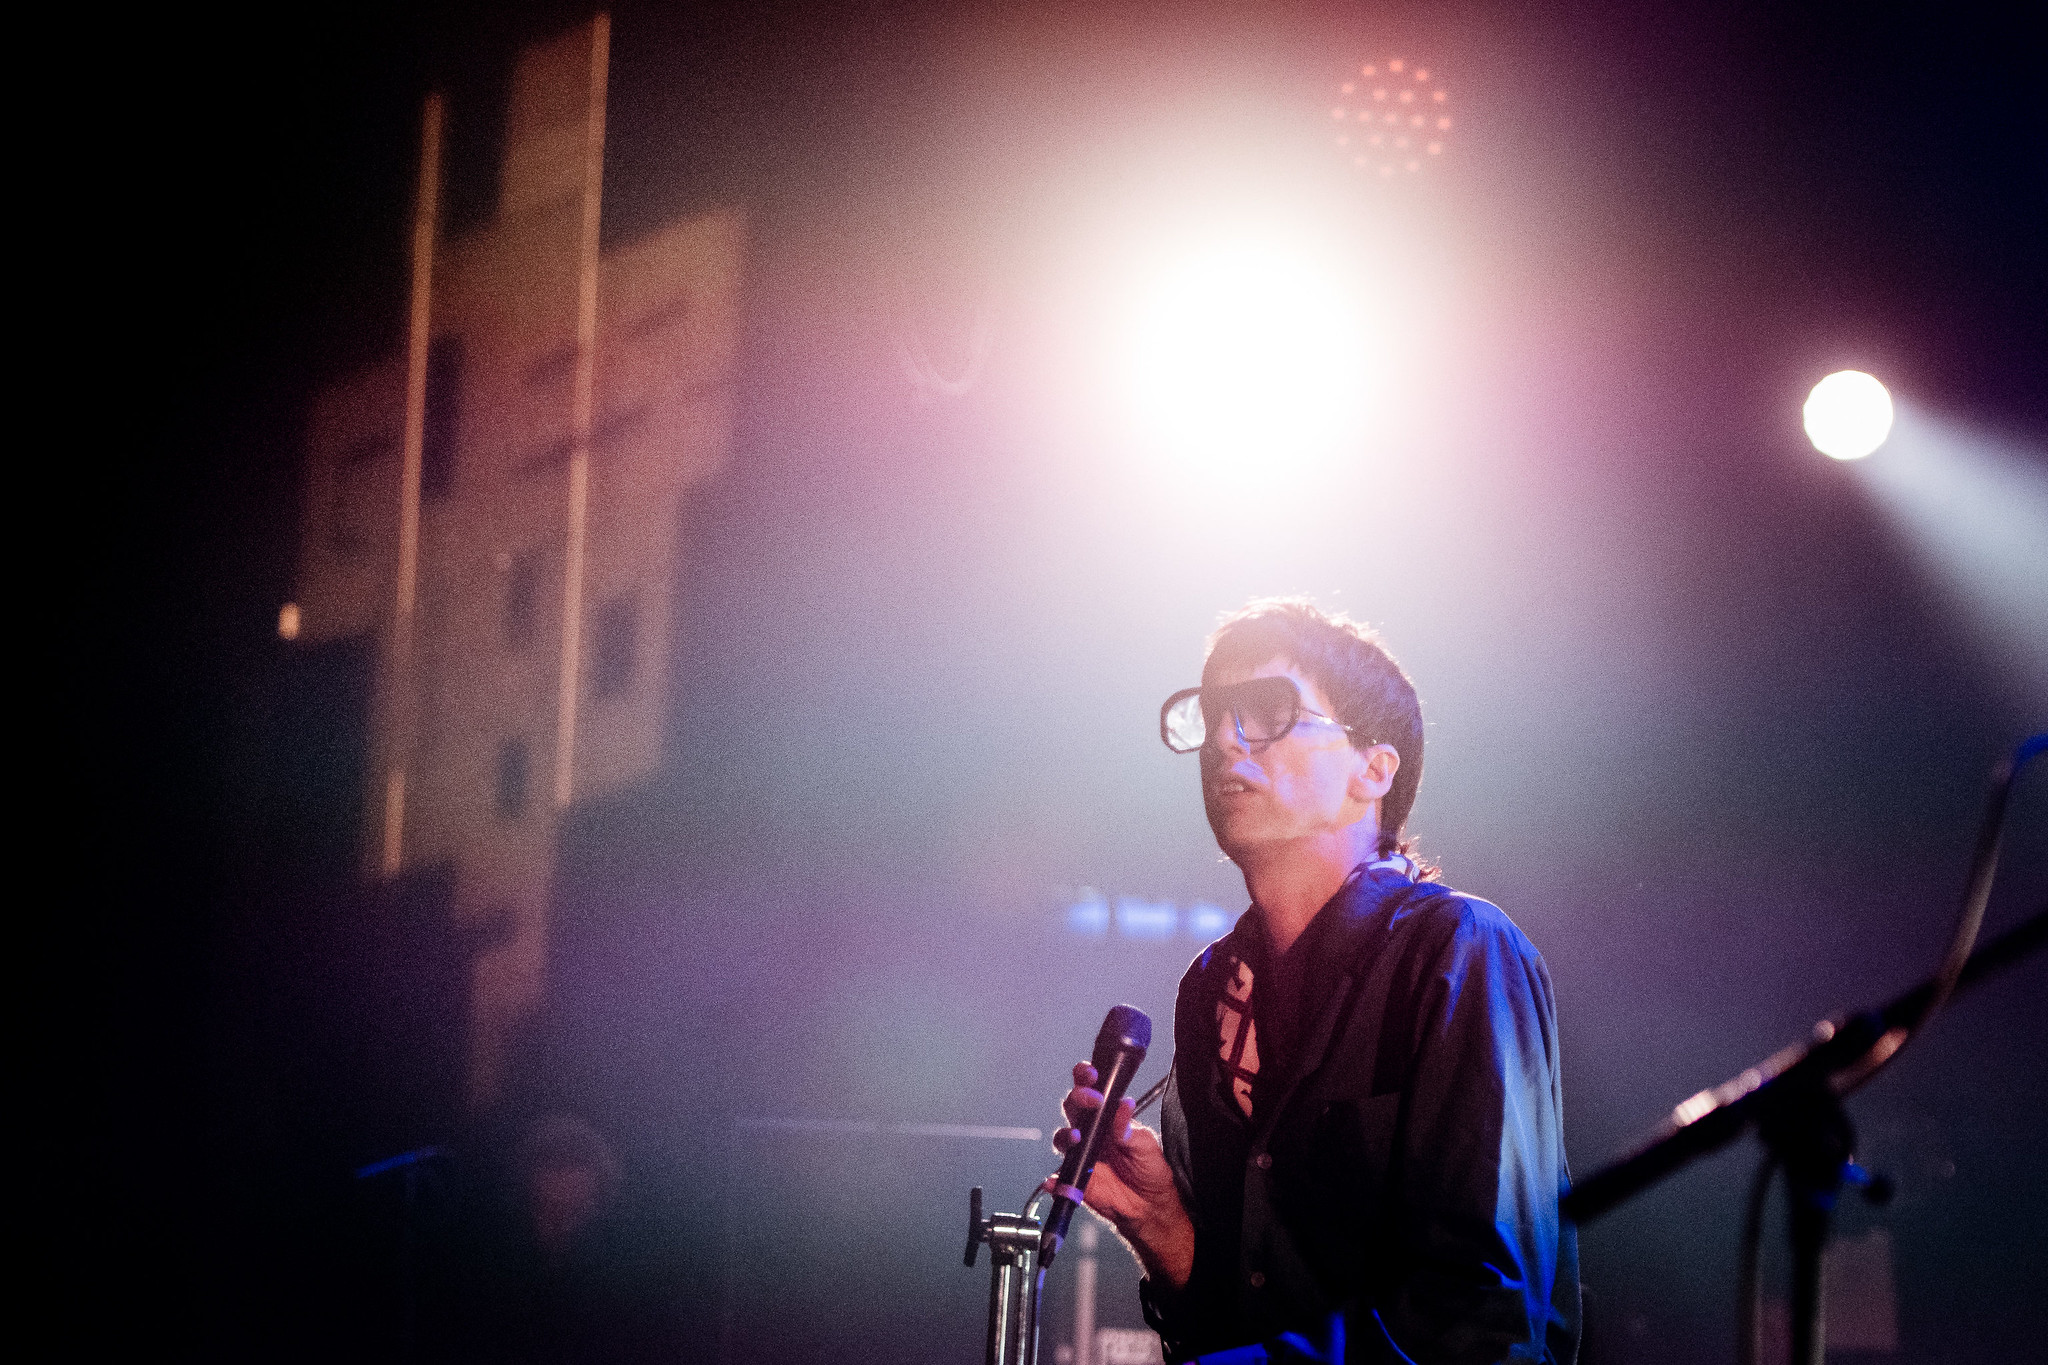 Video: watch Deerhunter perform live at Le Guess Who? 2019